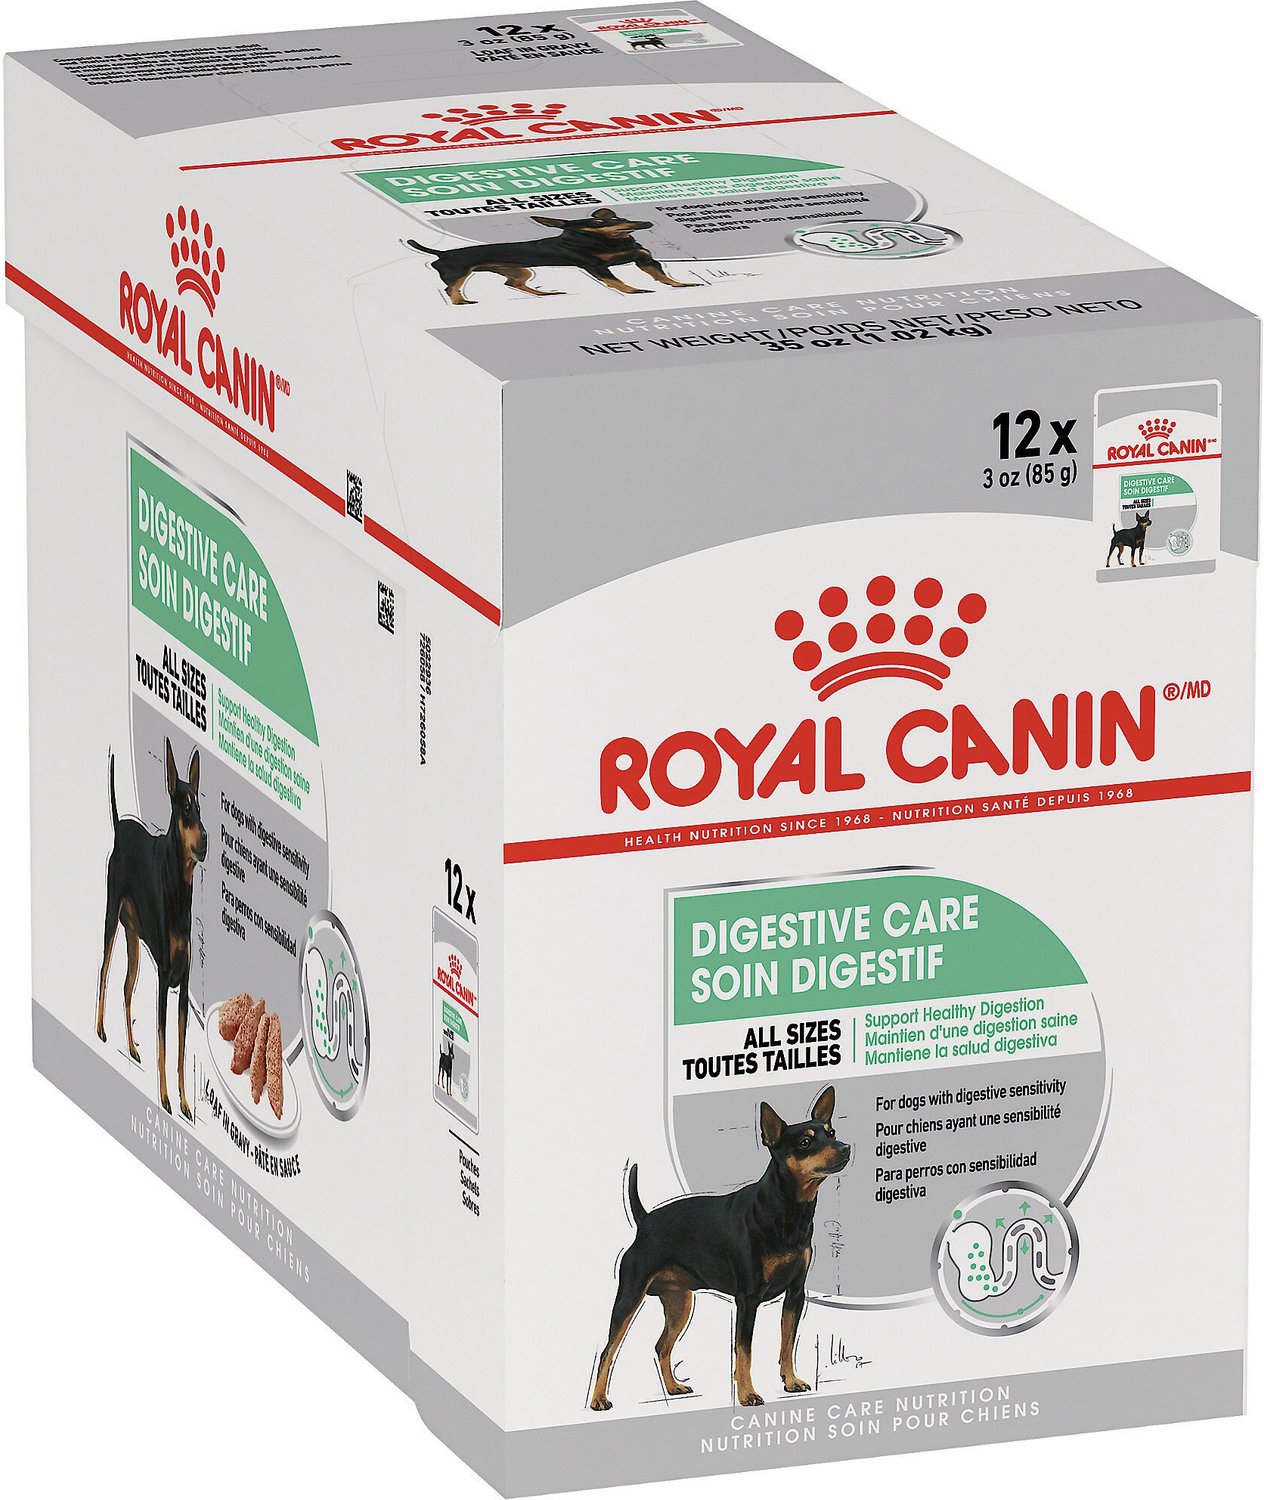 ROYAL CANIN Digestive Care Wet Dog Food, 3oz pouch, case